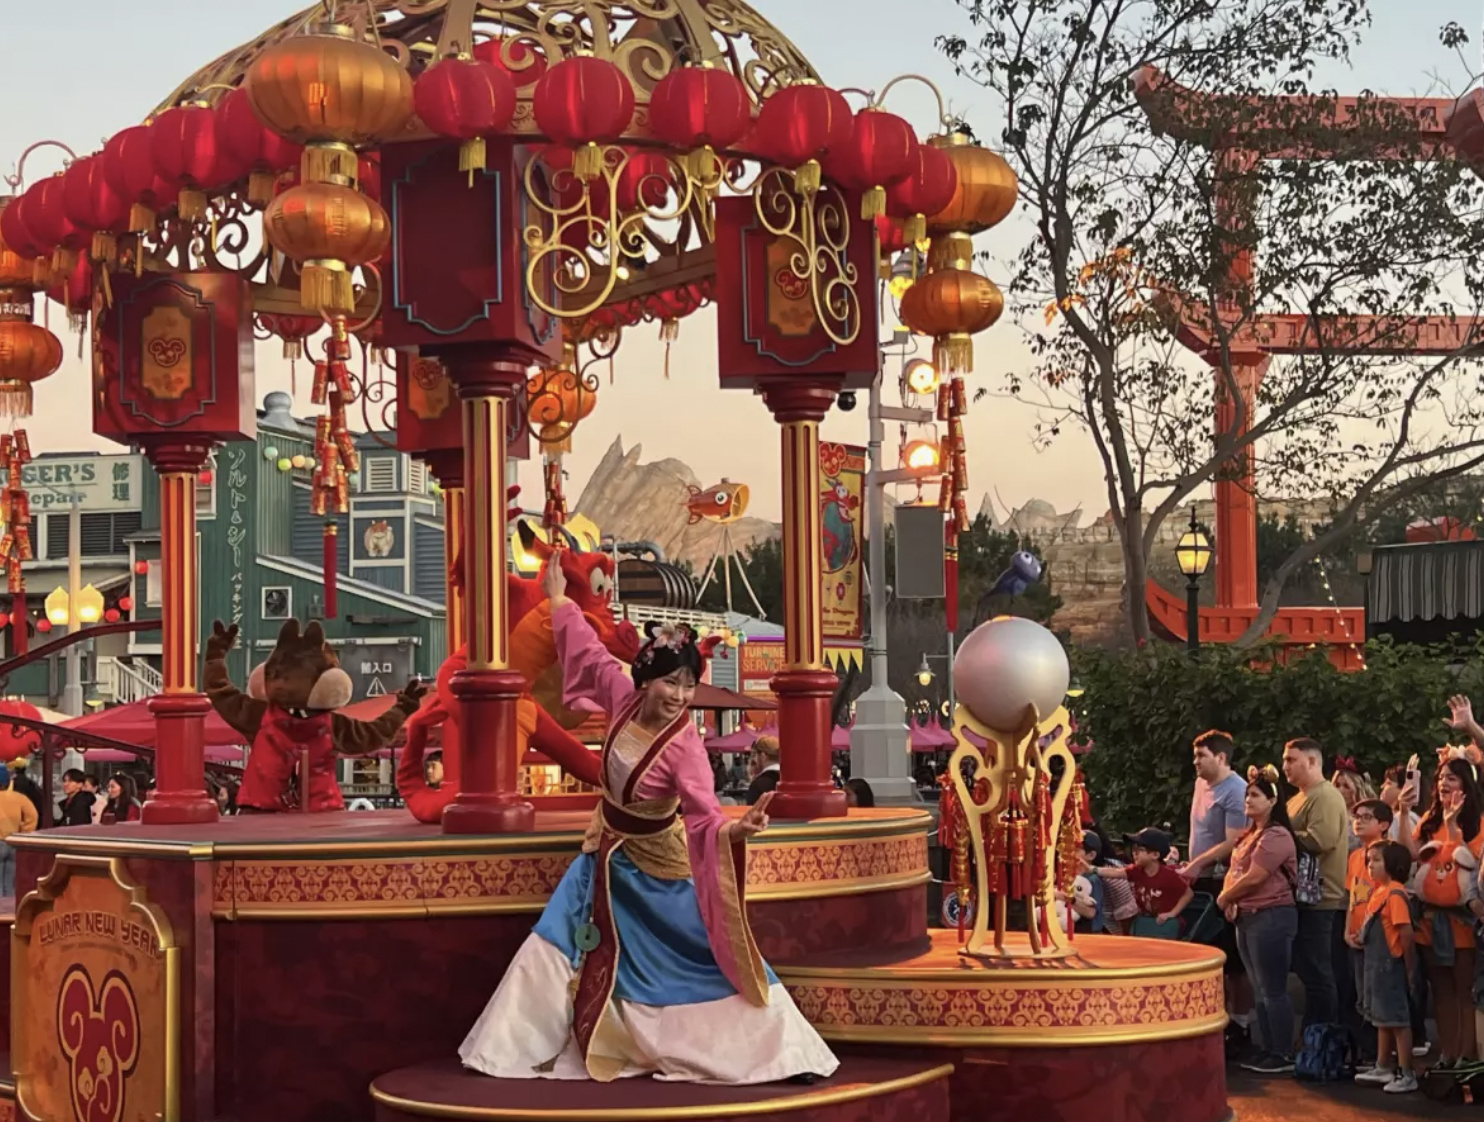 Home to awesome characters and rides, Disneys California Adventure is offering special character interactions, delicious food and immersive shows for guests this Lunar New Year.